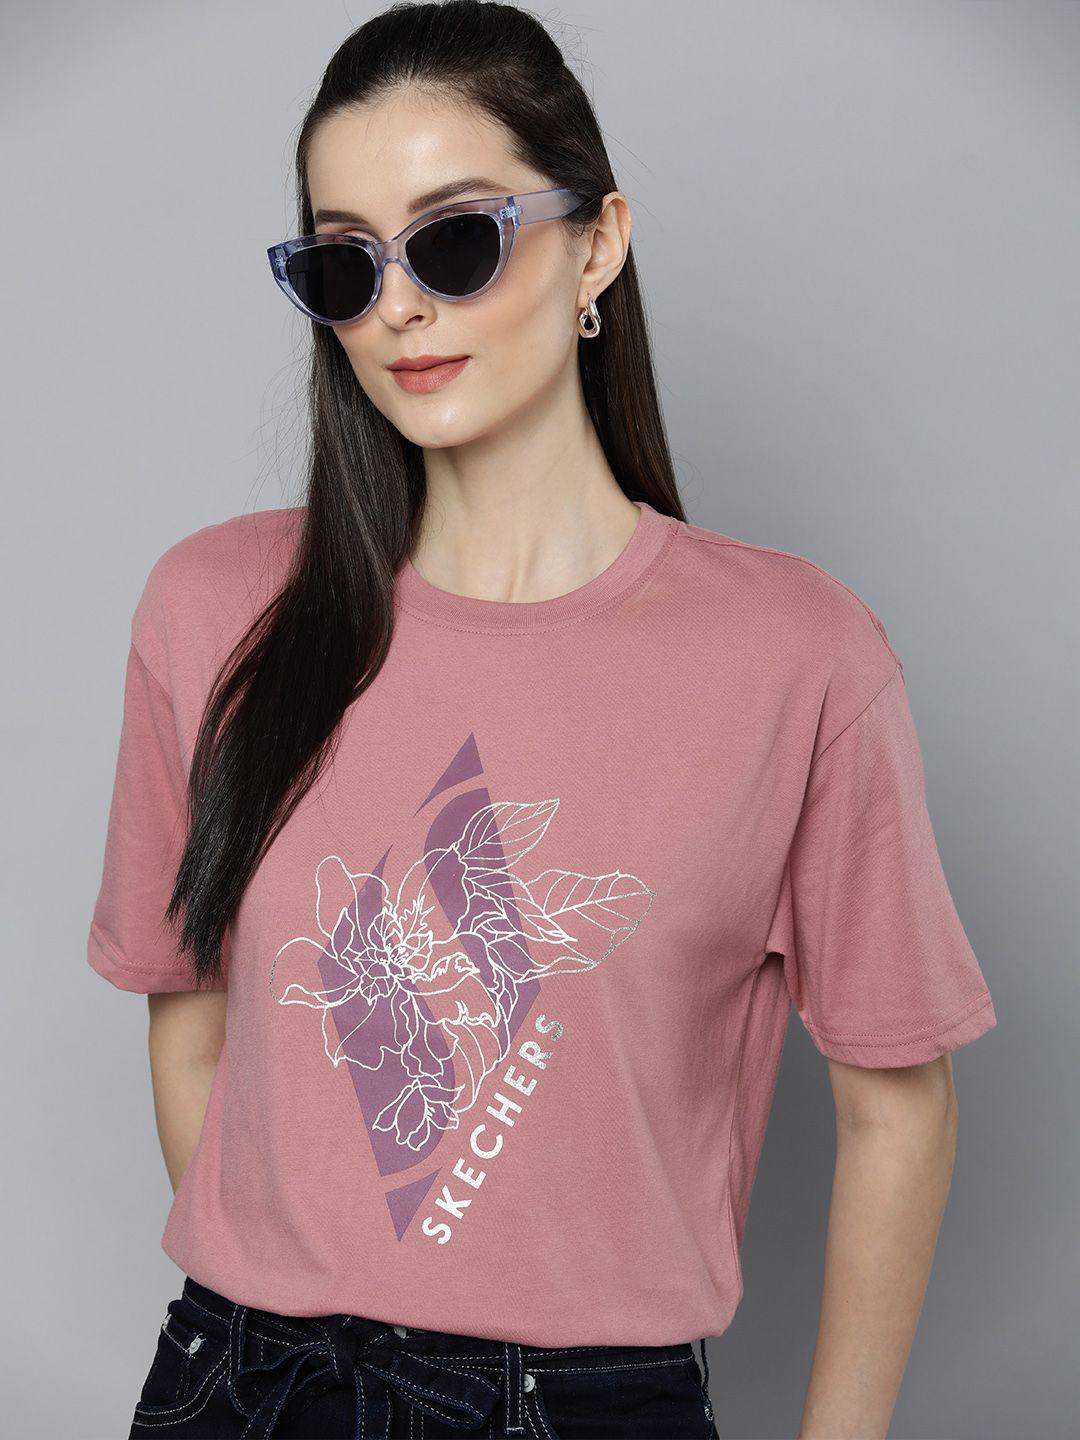 skechers-women-mauve-pink-floral-printed-t-shirt-with-brand-logo